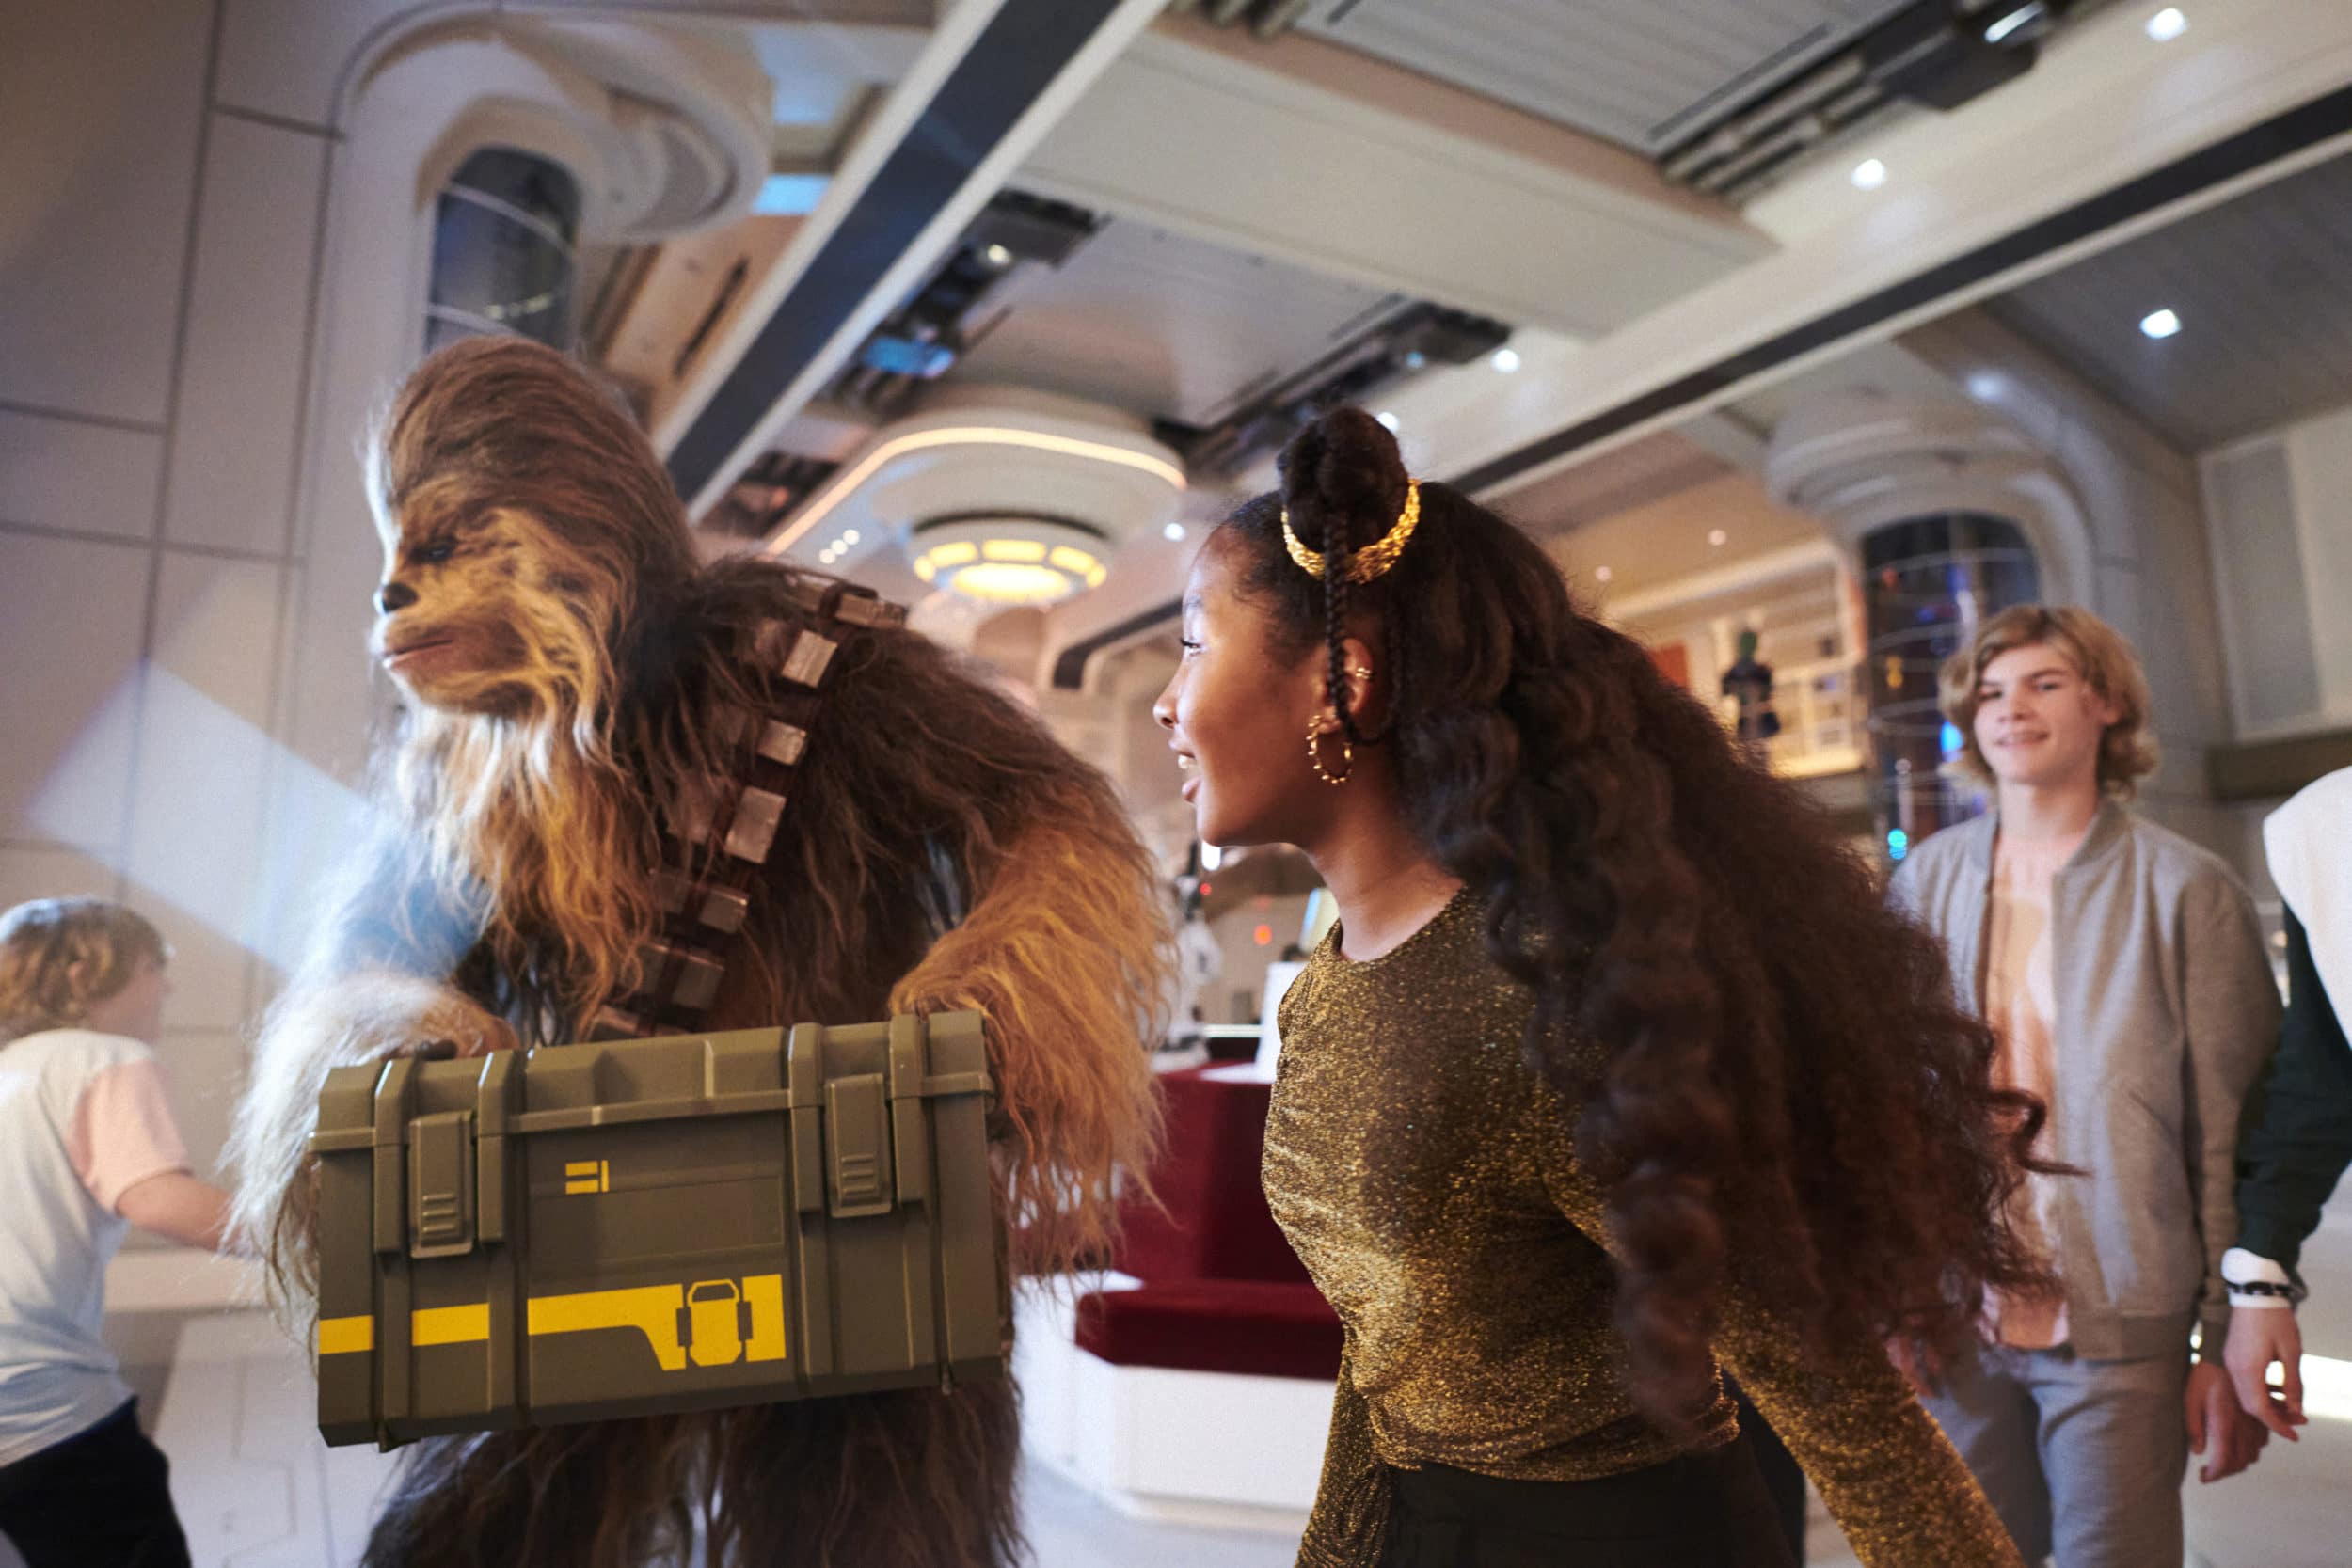 Chewie and some visiting guests carries a secret mission crate through the lobby of the Star Wars Galactic Starcruiser, Halcyon